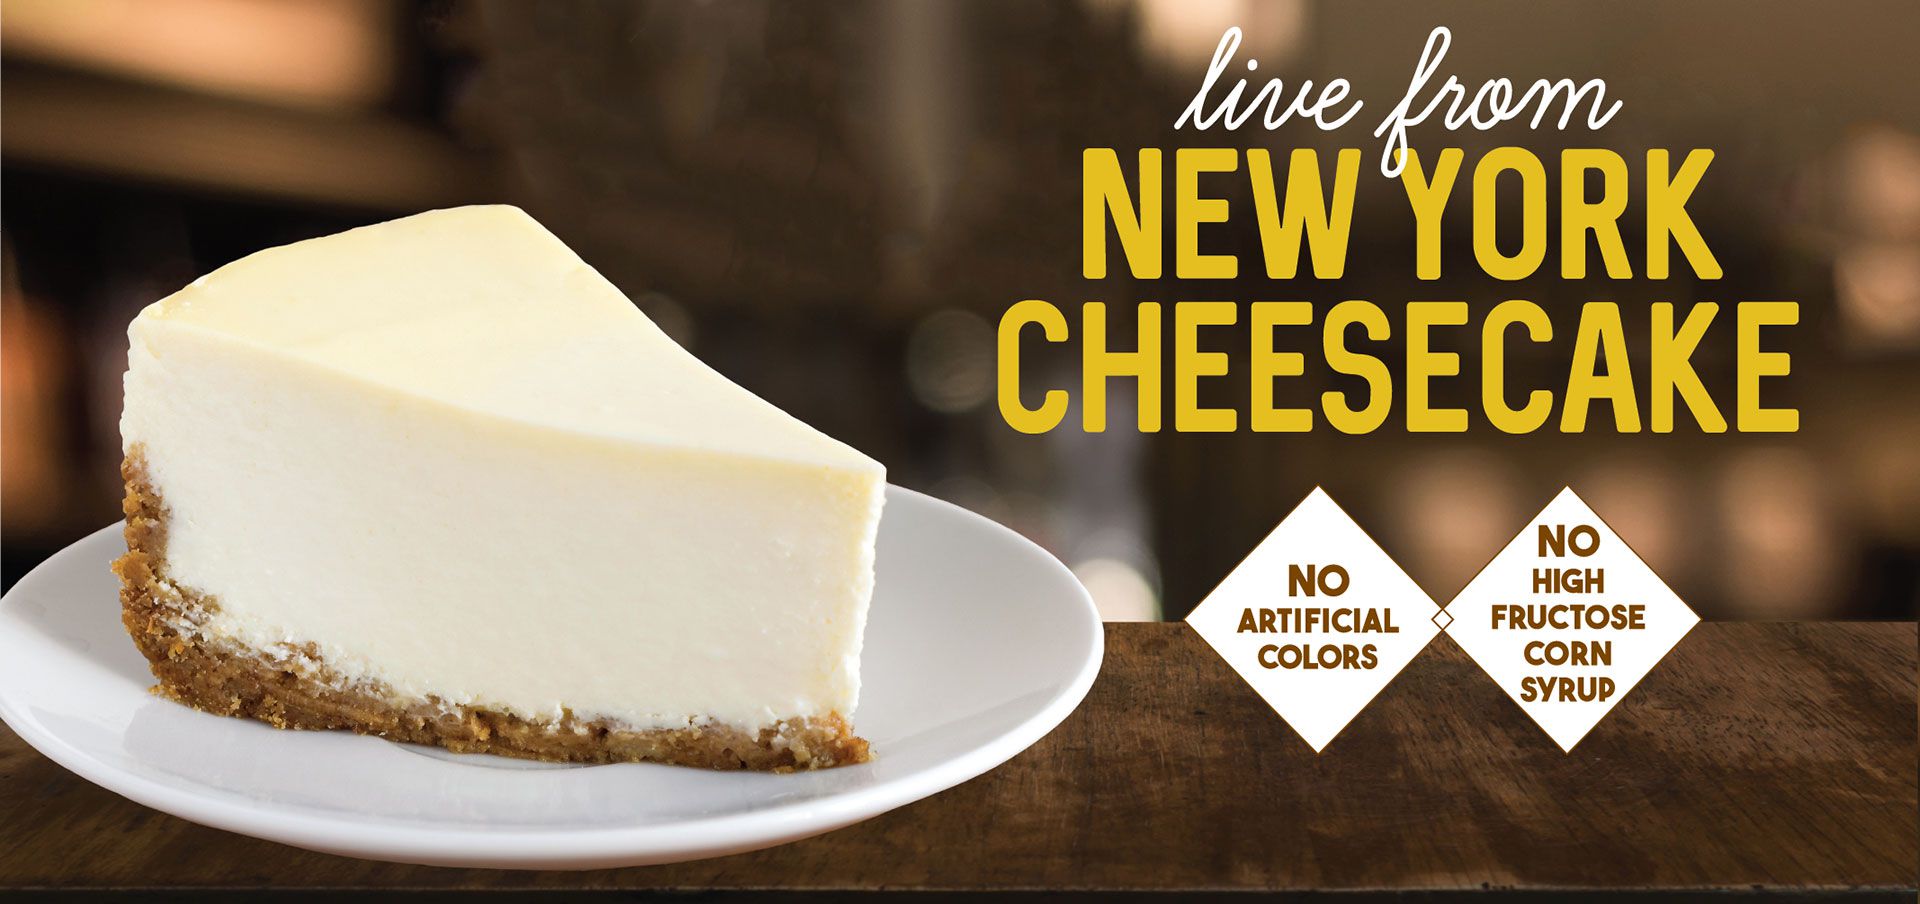 live from ny cheesecake label image